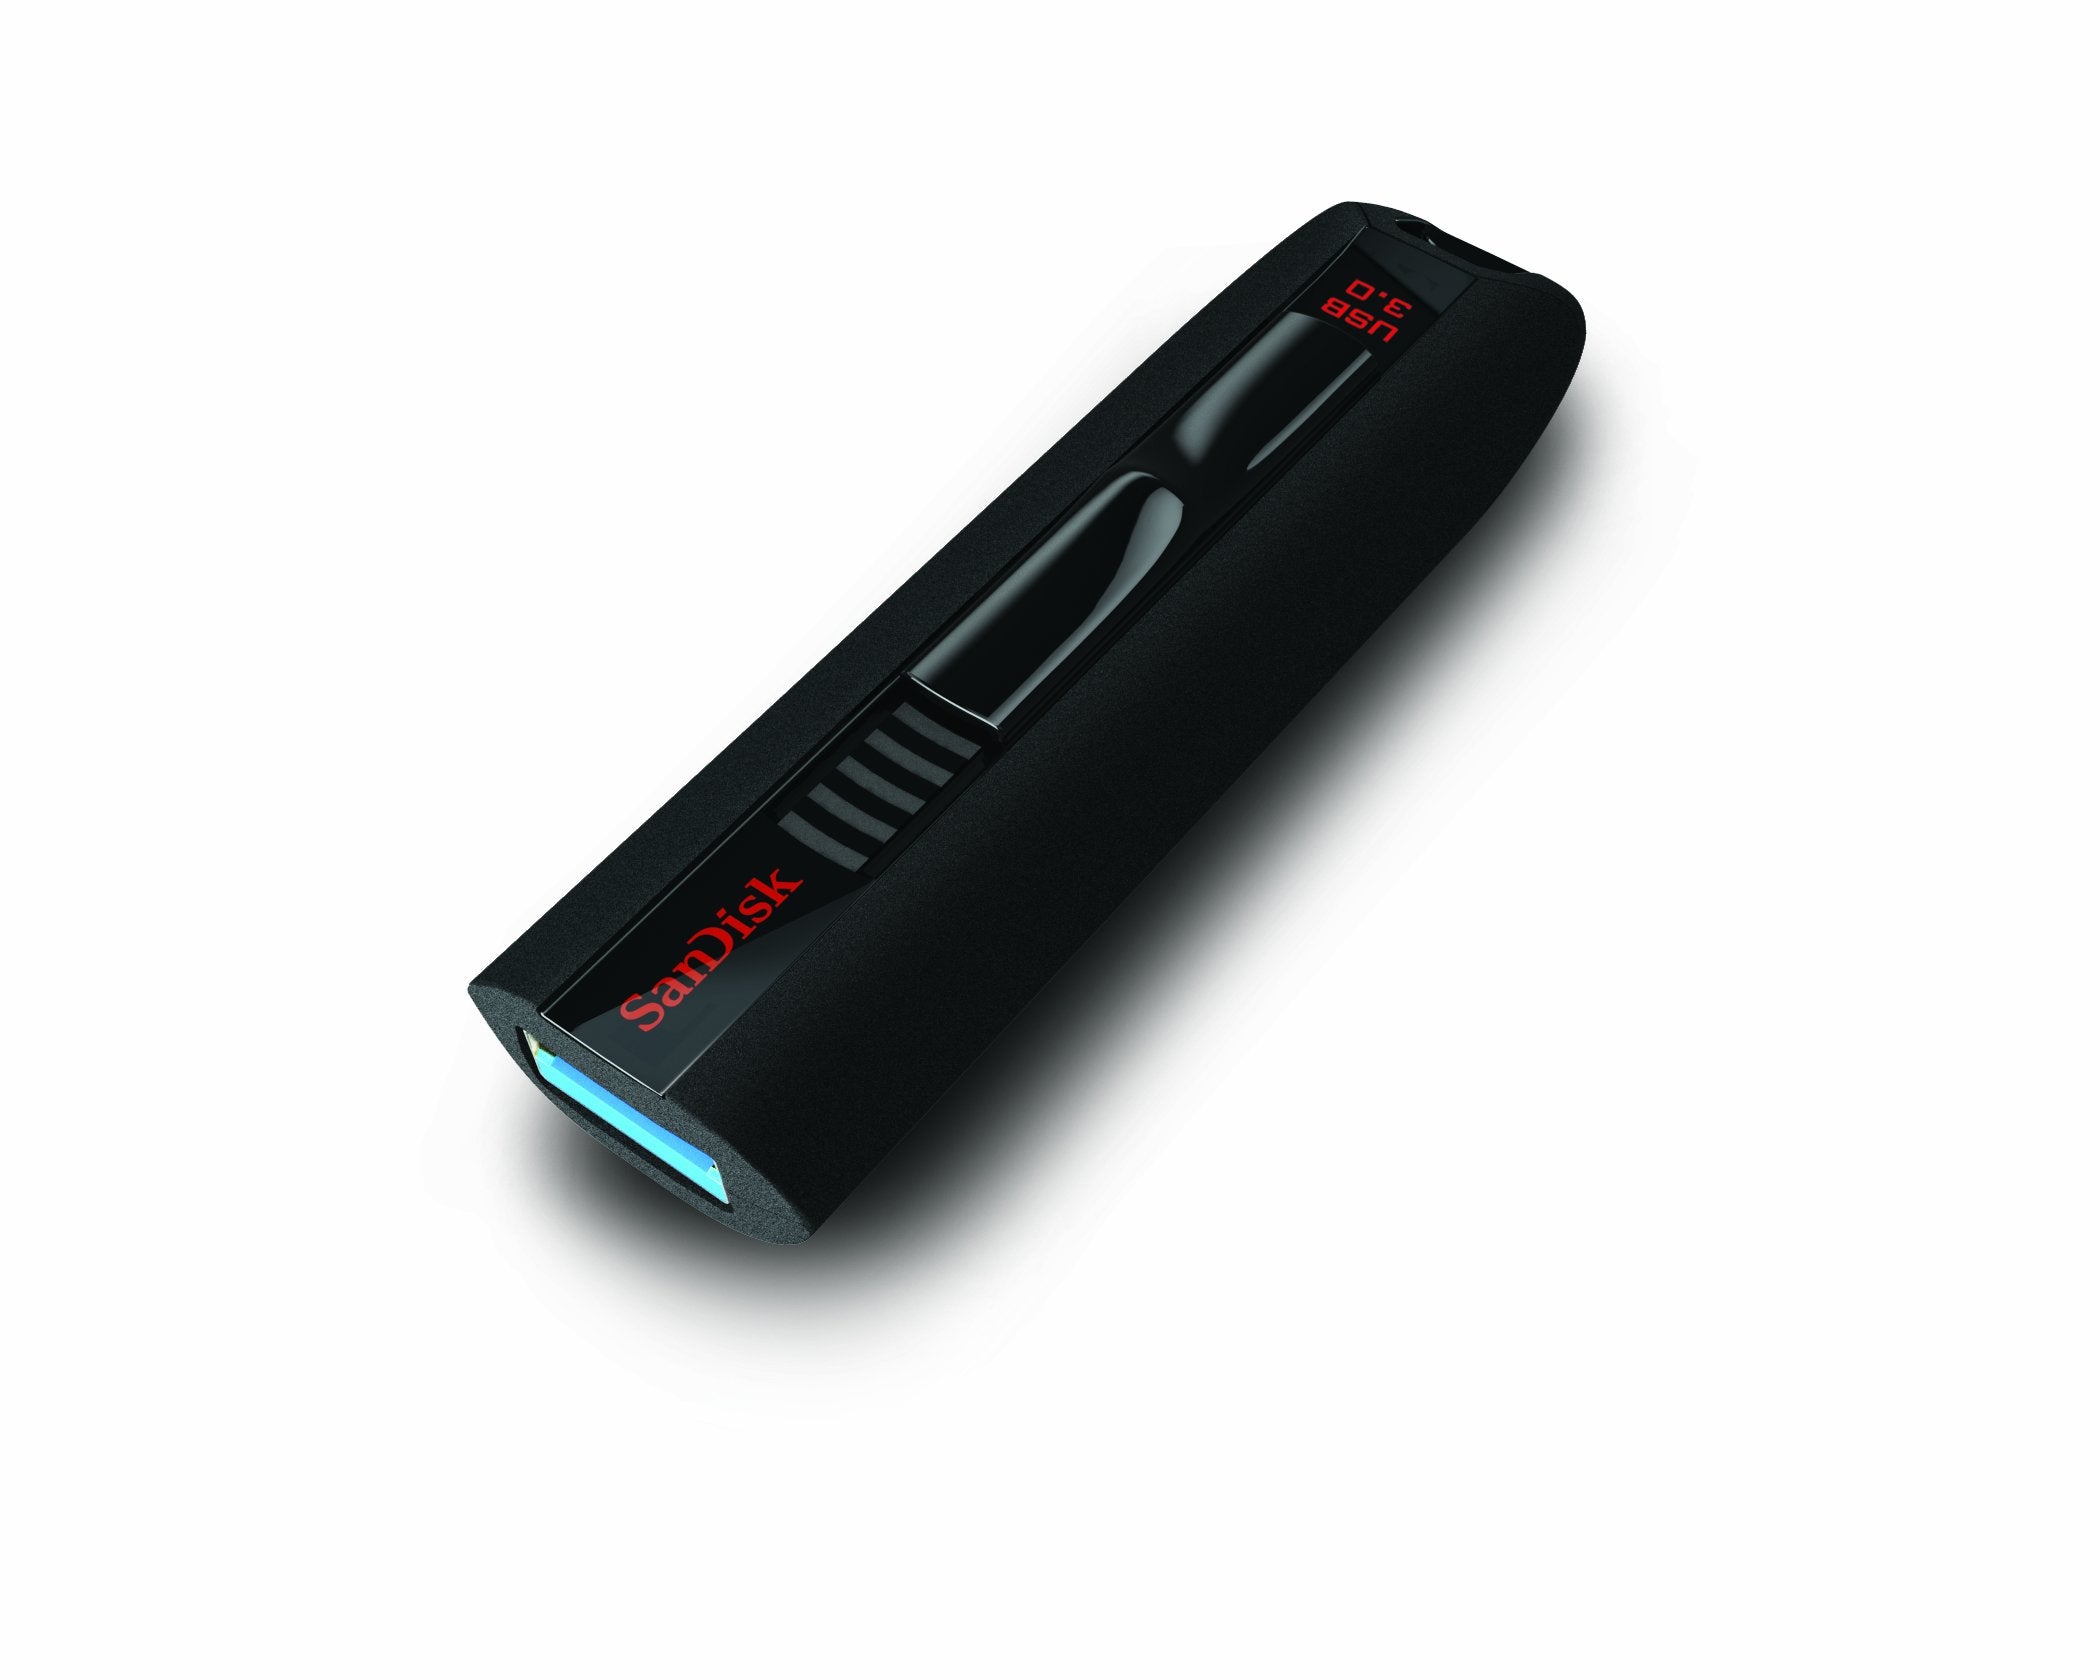 SanDisk Extreme CZ80 32GB USB 3.0 Flash Drive Speed Up To 245MB/s- SDCZ80-032G-CR (Certified Refurbished)